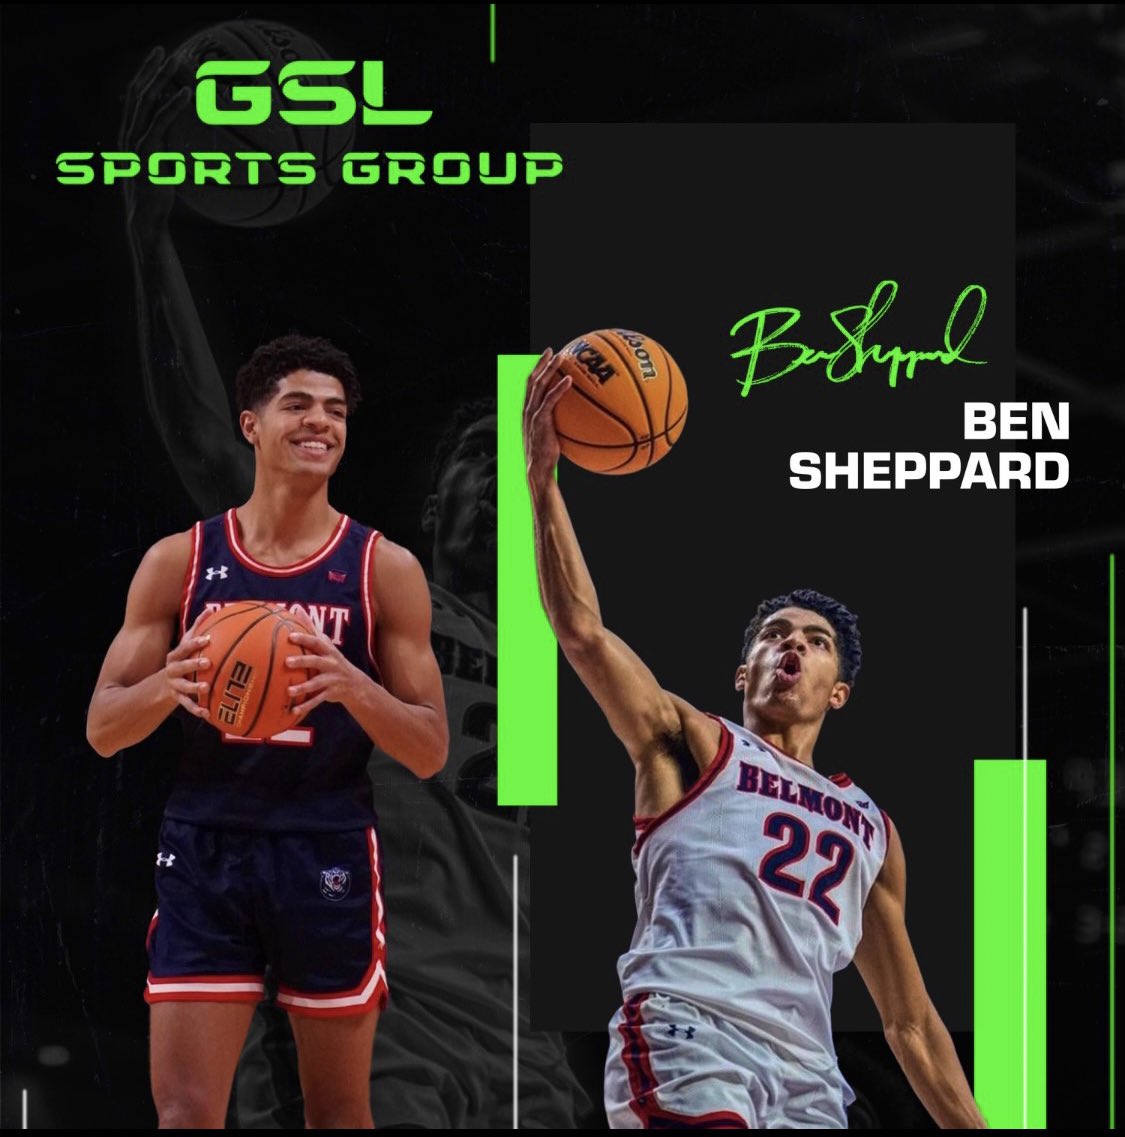 Excited to welcome Ben Sheppard to GSL Sports Group - Ben’s competitive spirit, ability to impact the game on both ends, & tenacious work ethic is what separates him. Time will tell what we’ve always known. The path to the NBA Draft starts now! @shepben2